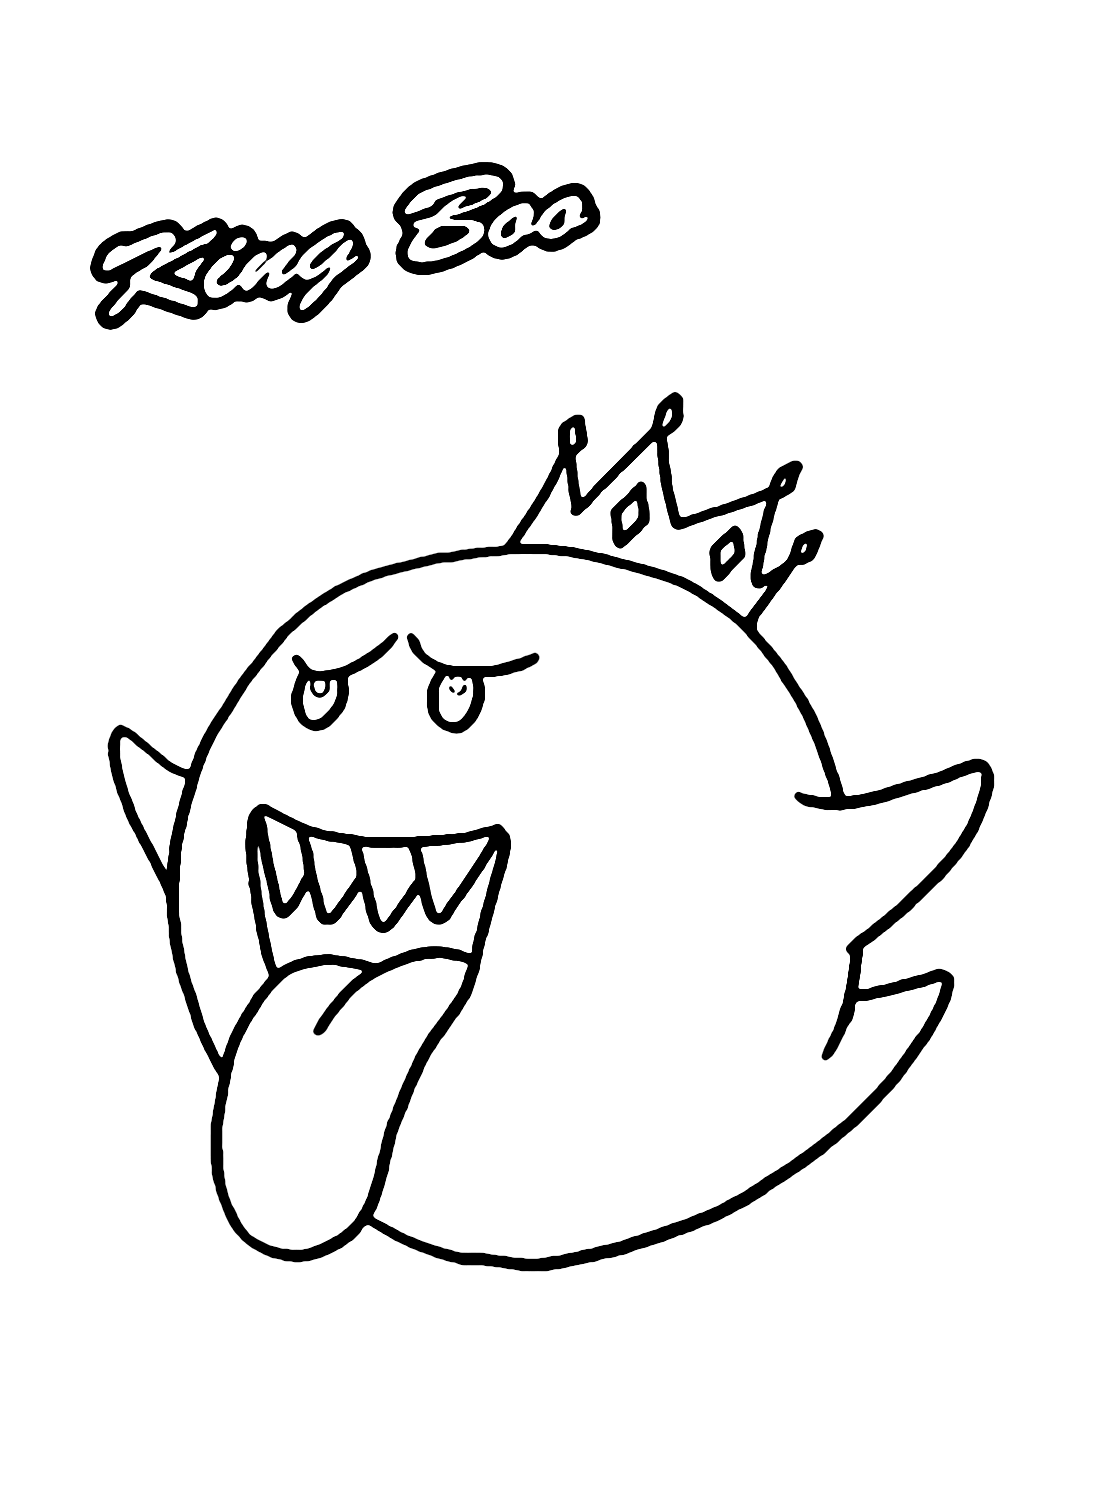 King Boo Pictures Coloring Pages